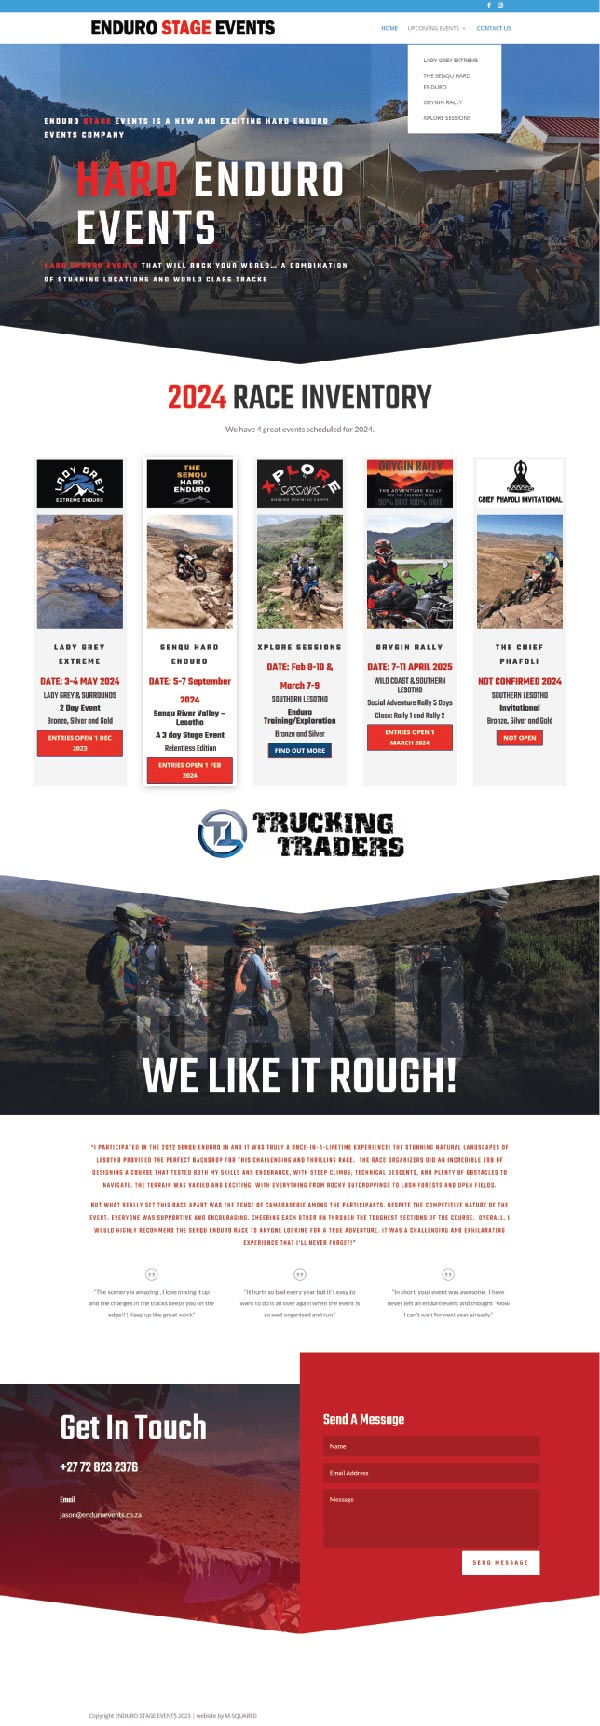 Enduro Stage Events Website by M-Squared Designs.  Web & Hosting.